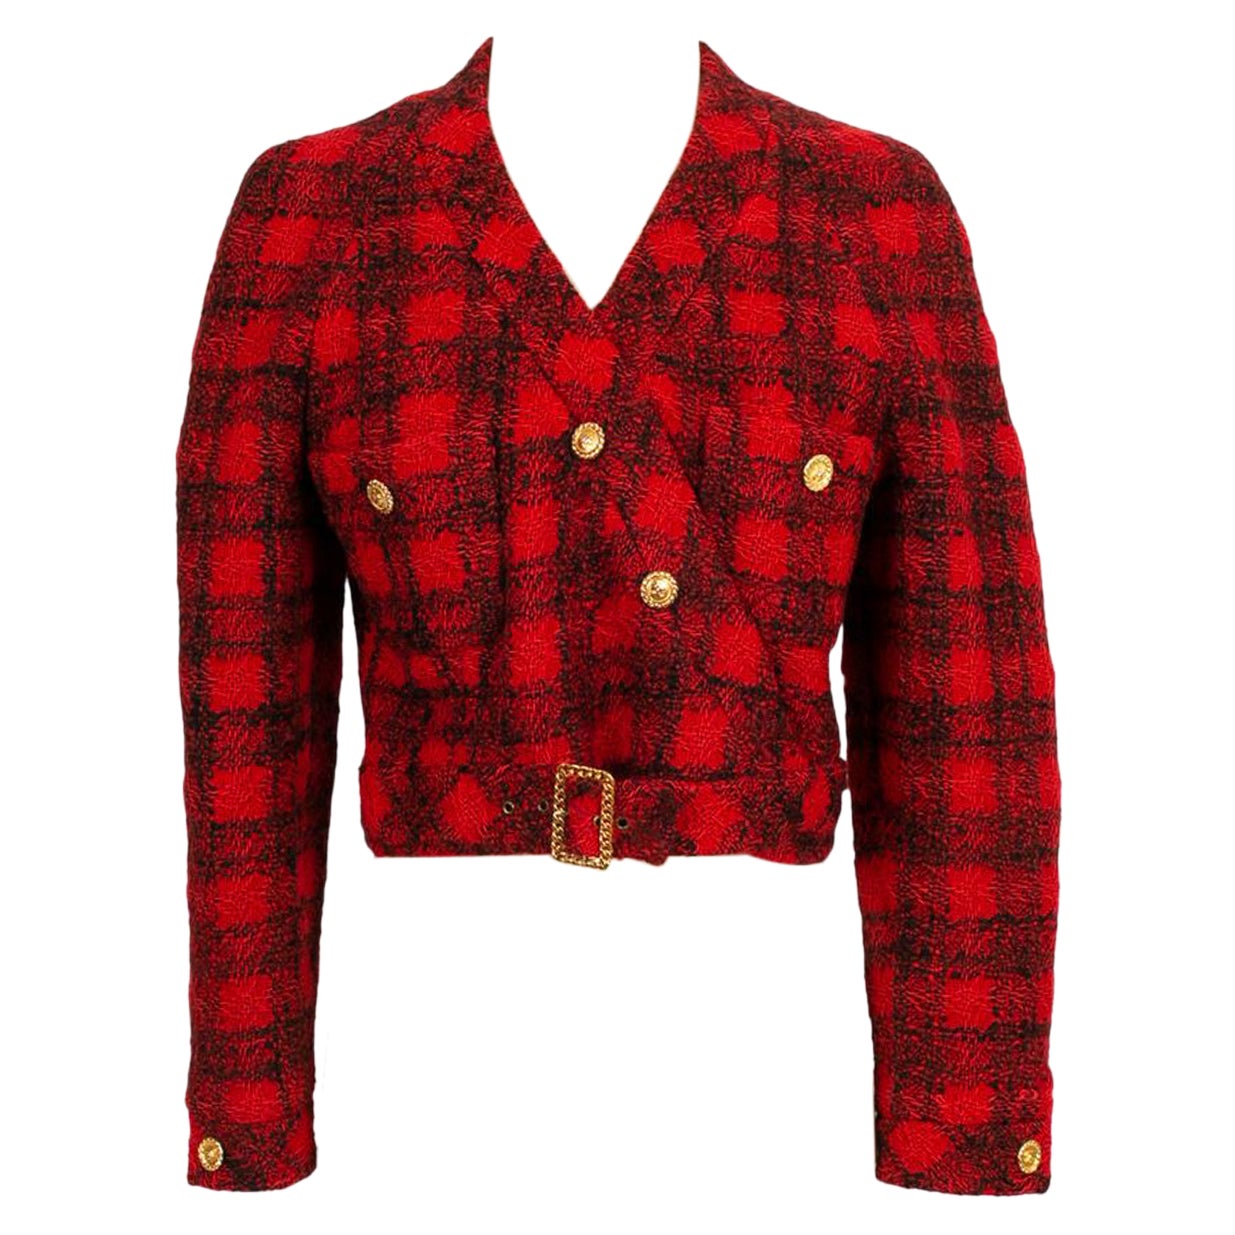 Chanel Short Jacket in Red and Black Wool